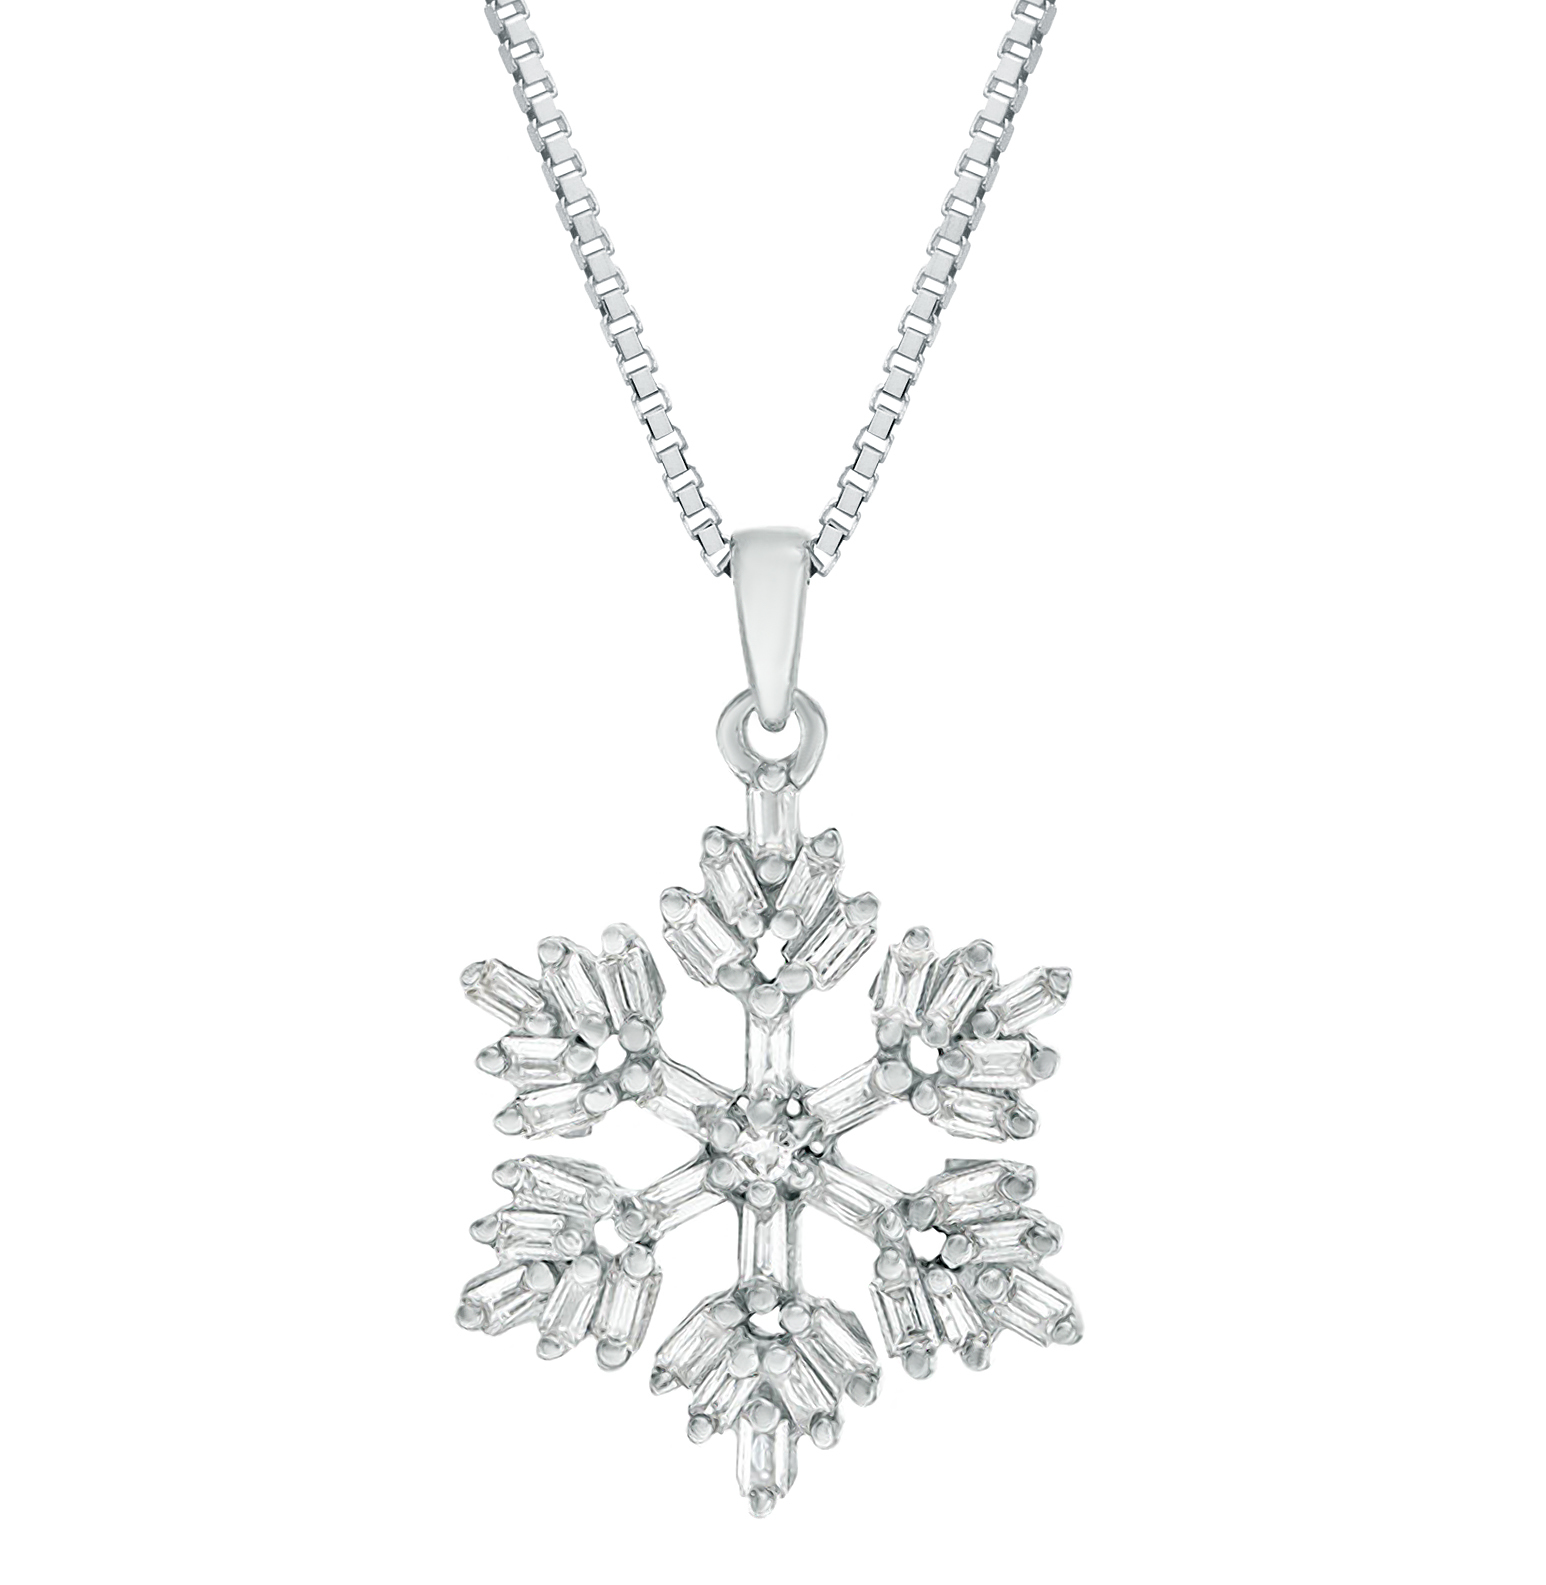 Women's Snowflake Pendant with Lobster Clasp, 925 Sterling Silver, .25 Cttw, 18 Inch Adjustable Chain  | Lavari Jewelers